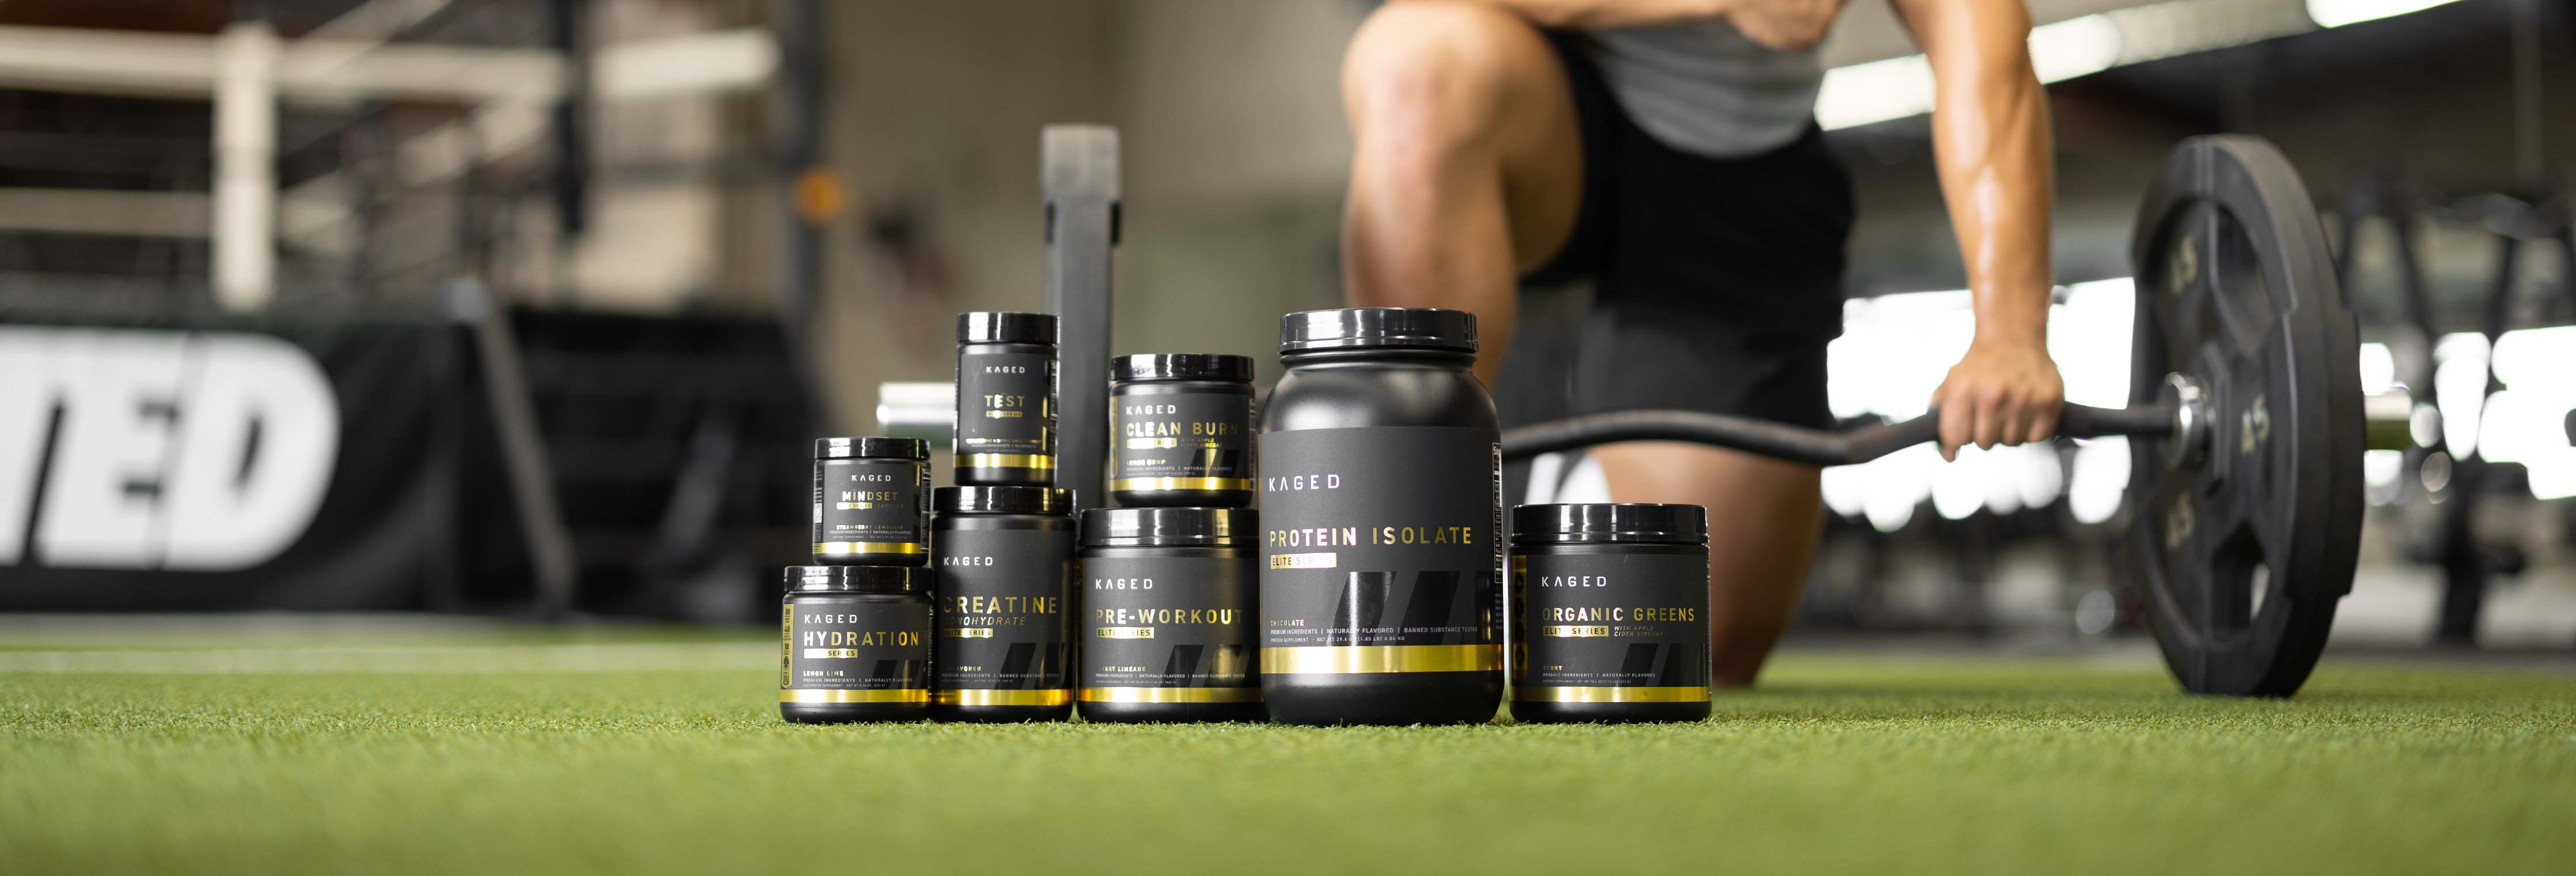 How The Kaged Elite Series Compares To Other Kaged Supplements